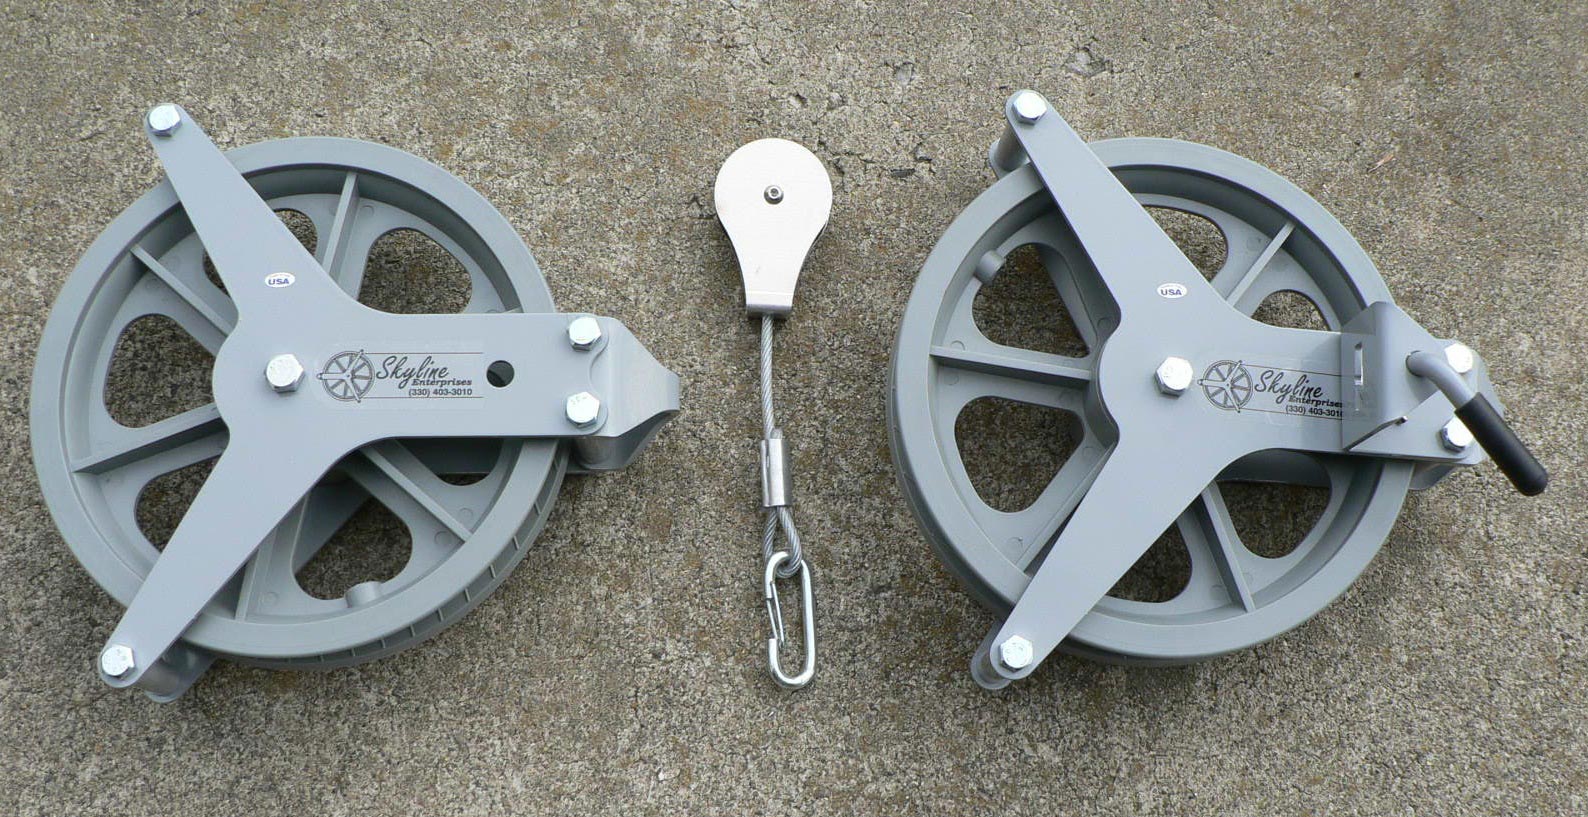 2 Pack 4 Inch Wheel High Grade Plastic Clothesline Pulley Weather Resistant 